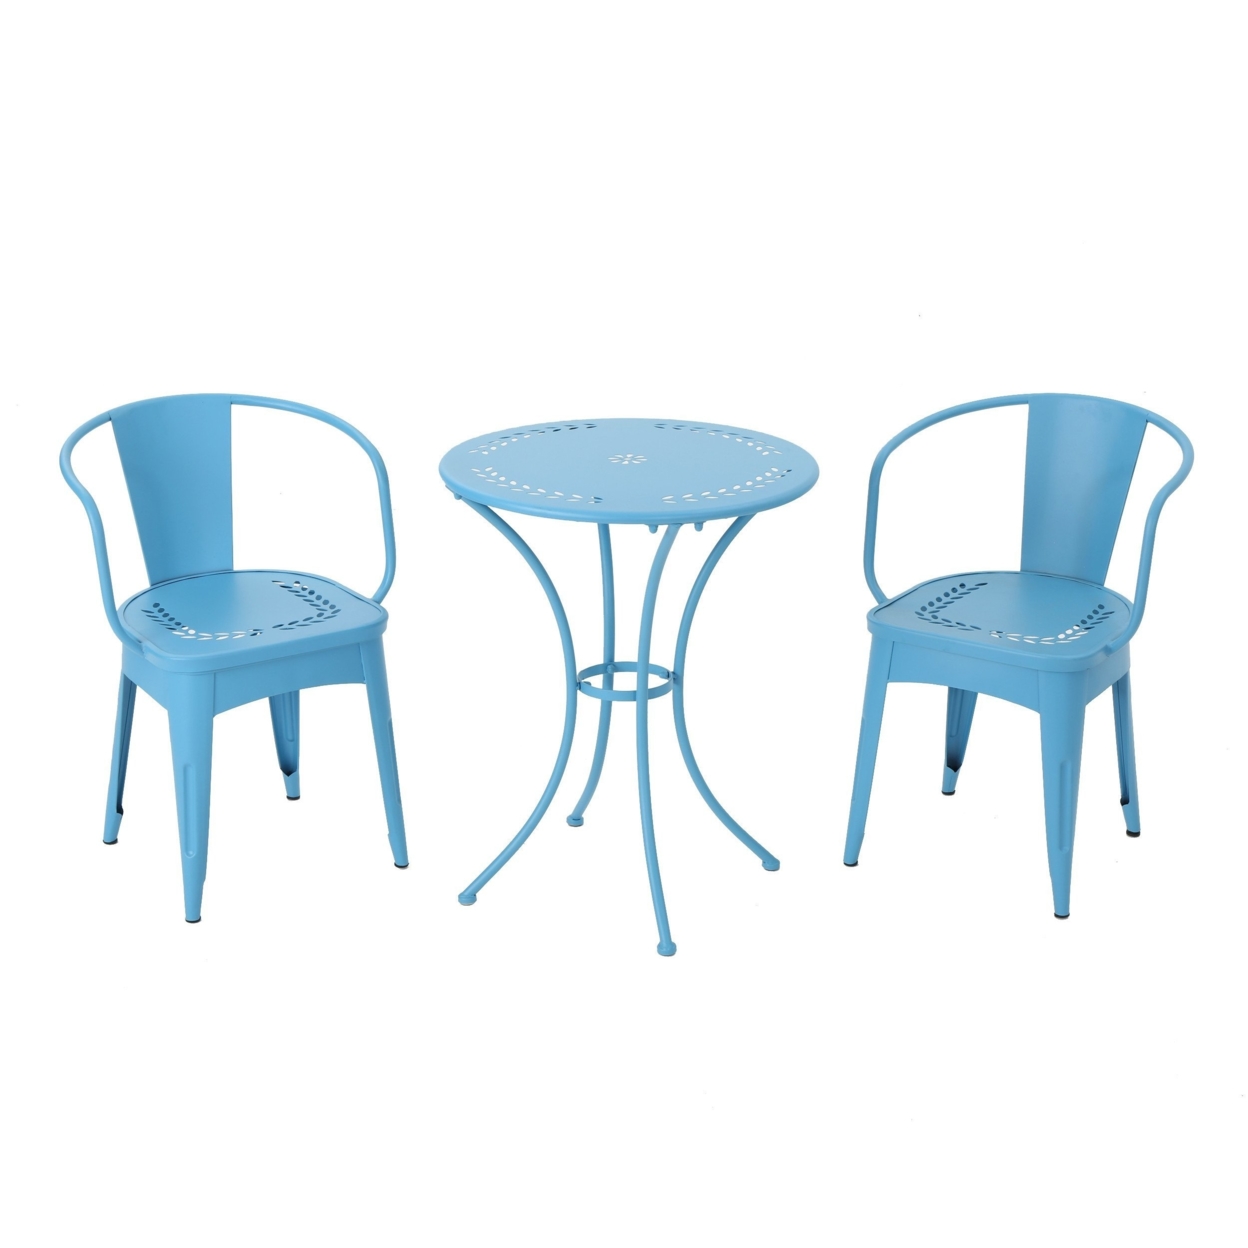 Leona Outdoor 3 Piece Paint Finished Iron Bistro Set - Matte Teal